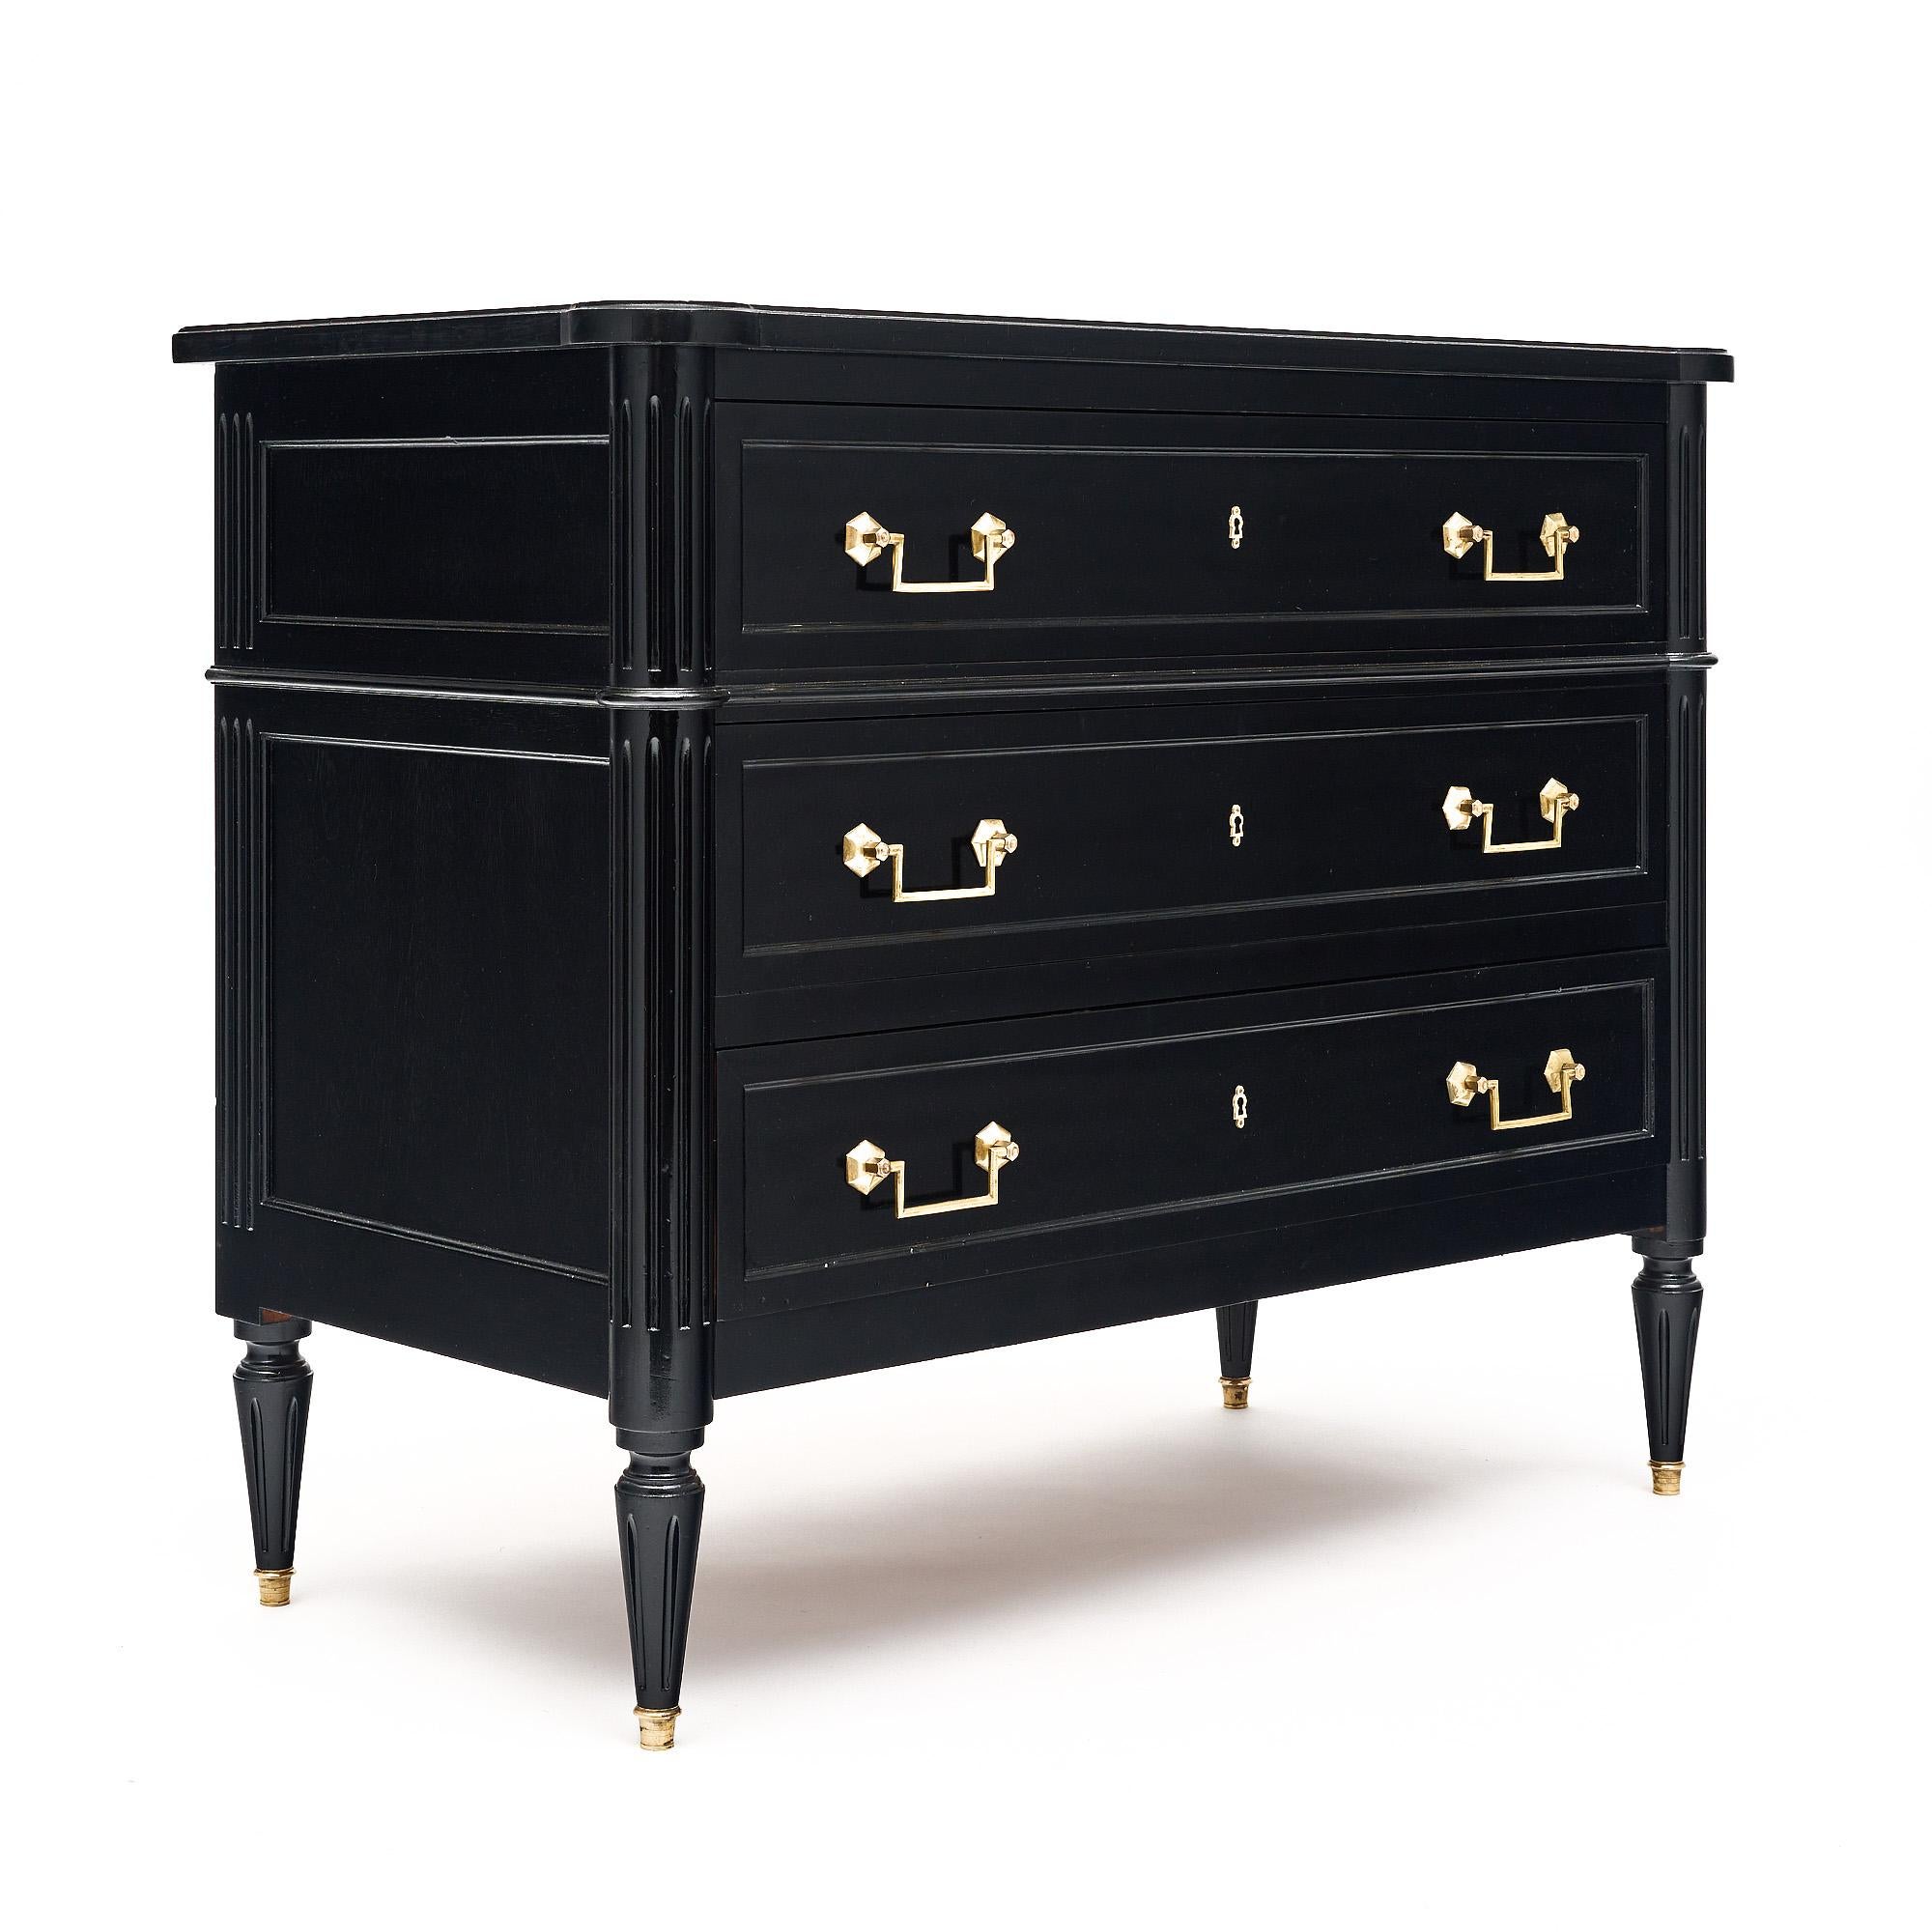 Petite chest of drawers from France in the Louis XVI style. This piece is made of mahogany that has been ebonized and finished with a lustrous French polish. All three dovetailed drawers boast finely cast brass pulls. The chest sits on four tapered,